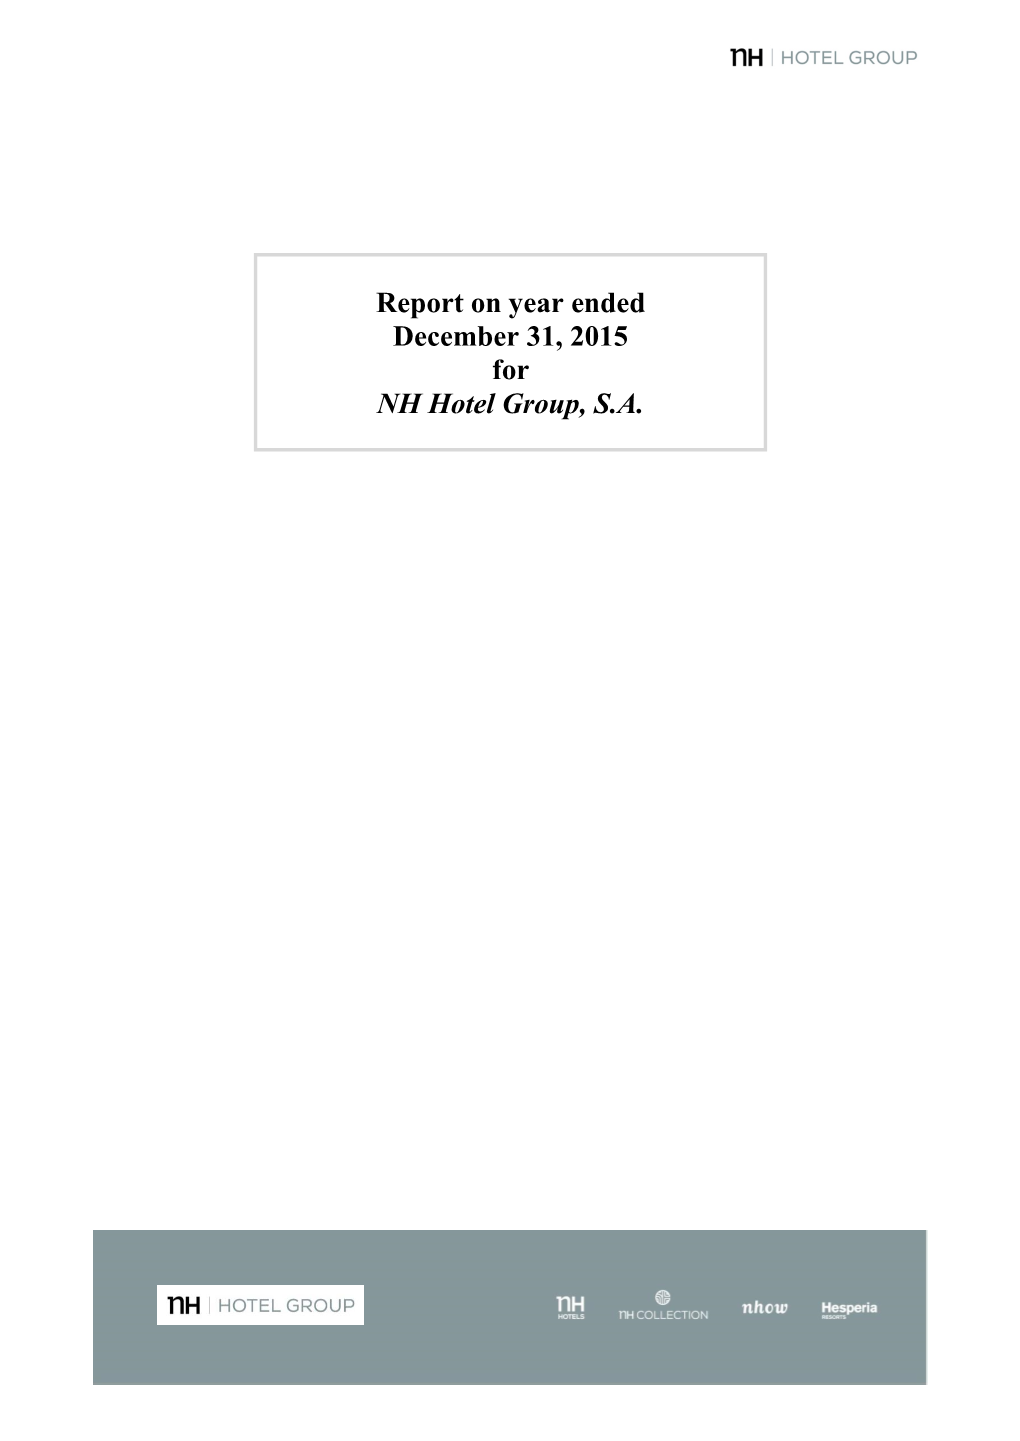 Report on Year Ended December 31, 2015 for NH Hotel Group, S.A